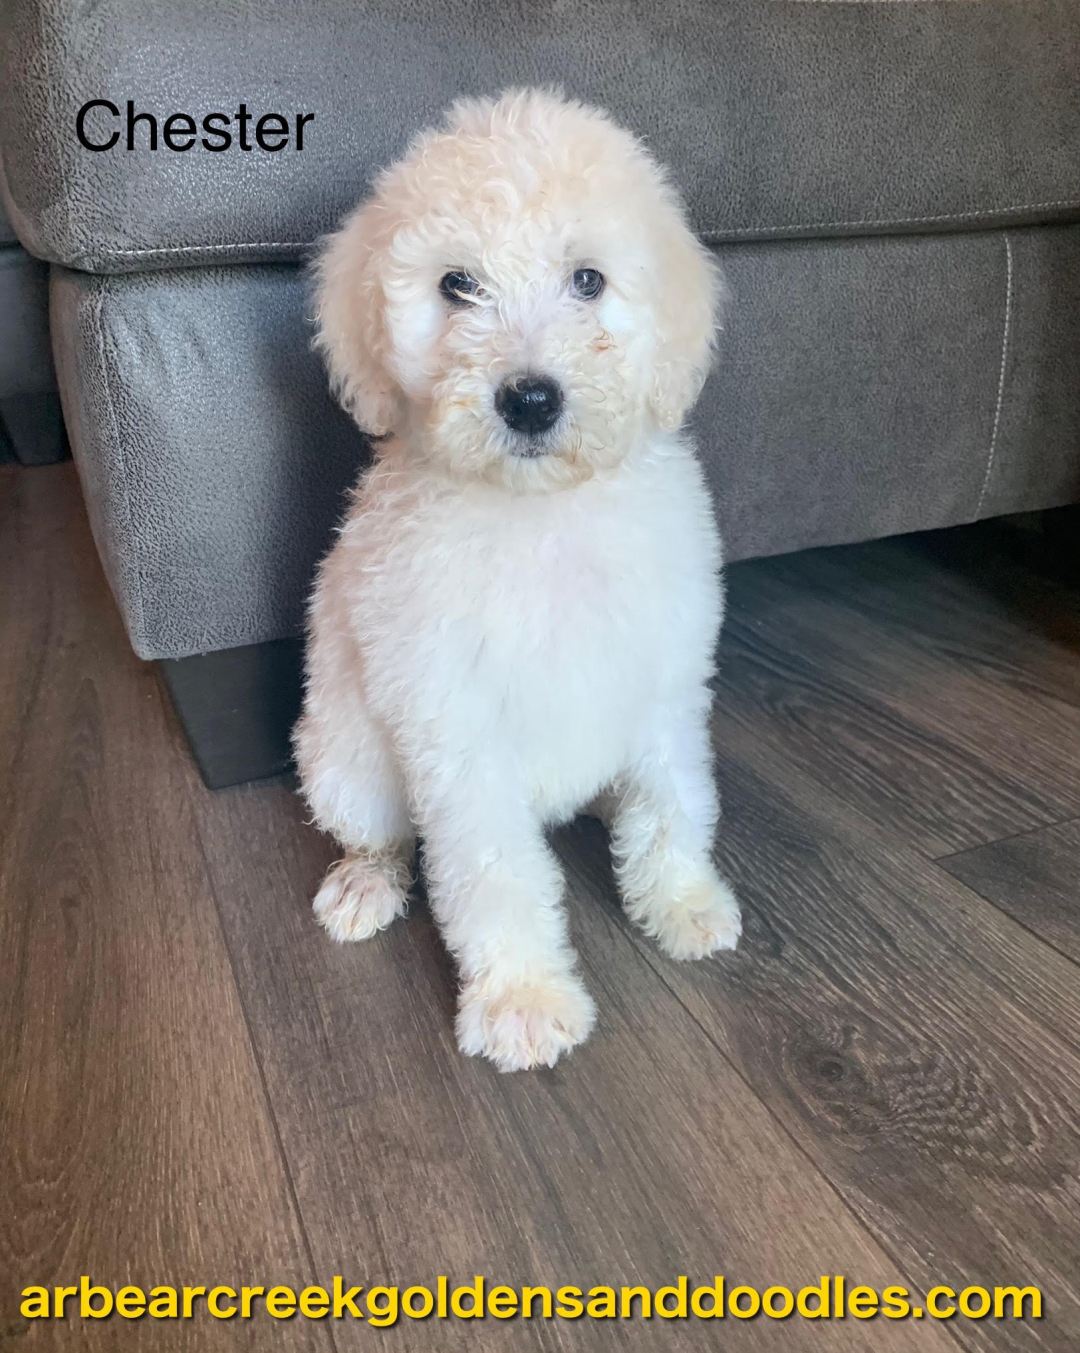 Cream/White Labradoodle Puppy named Chester